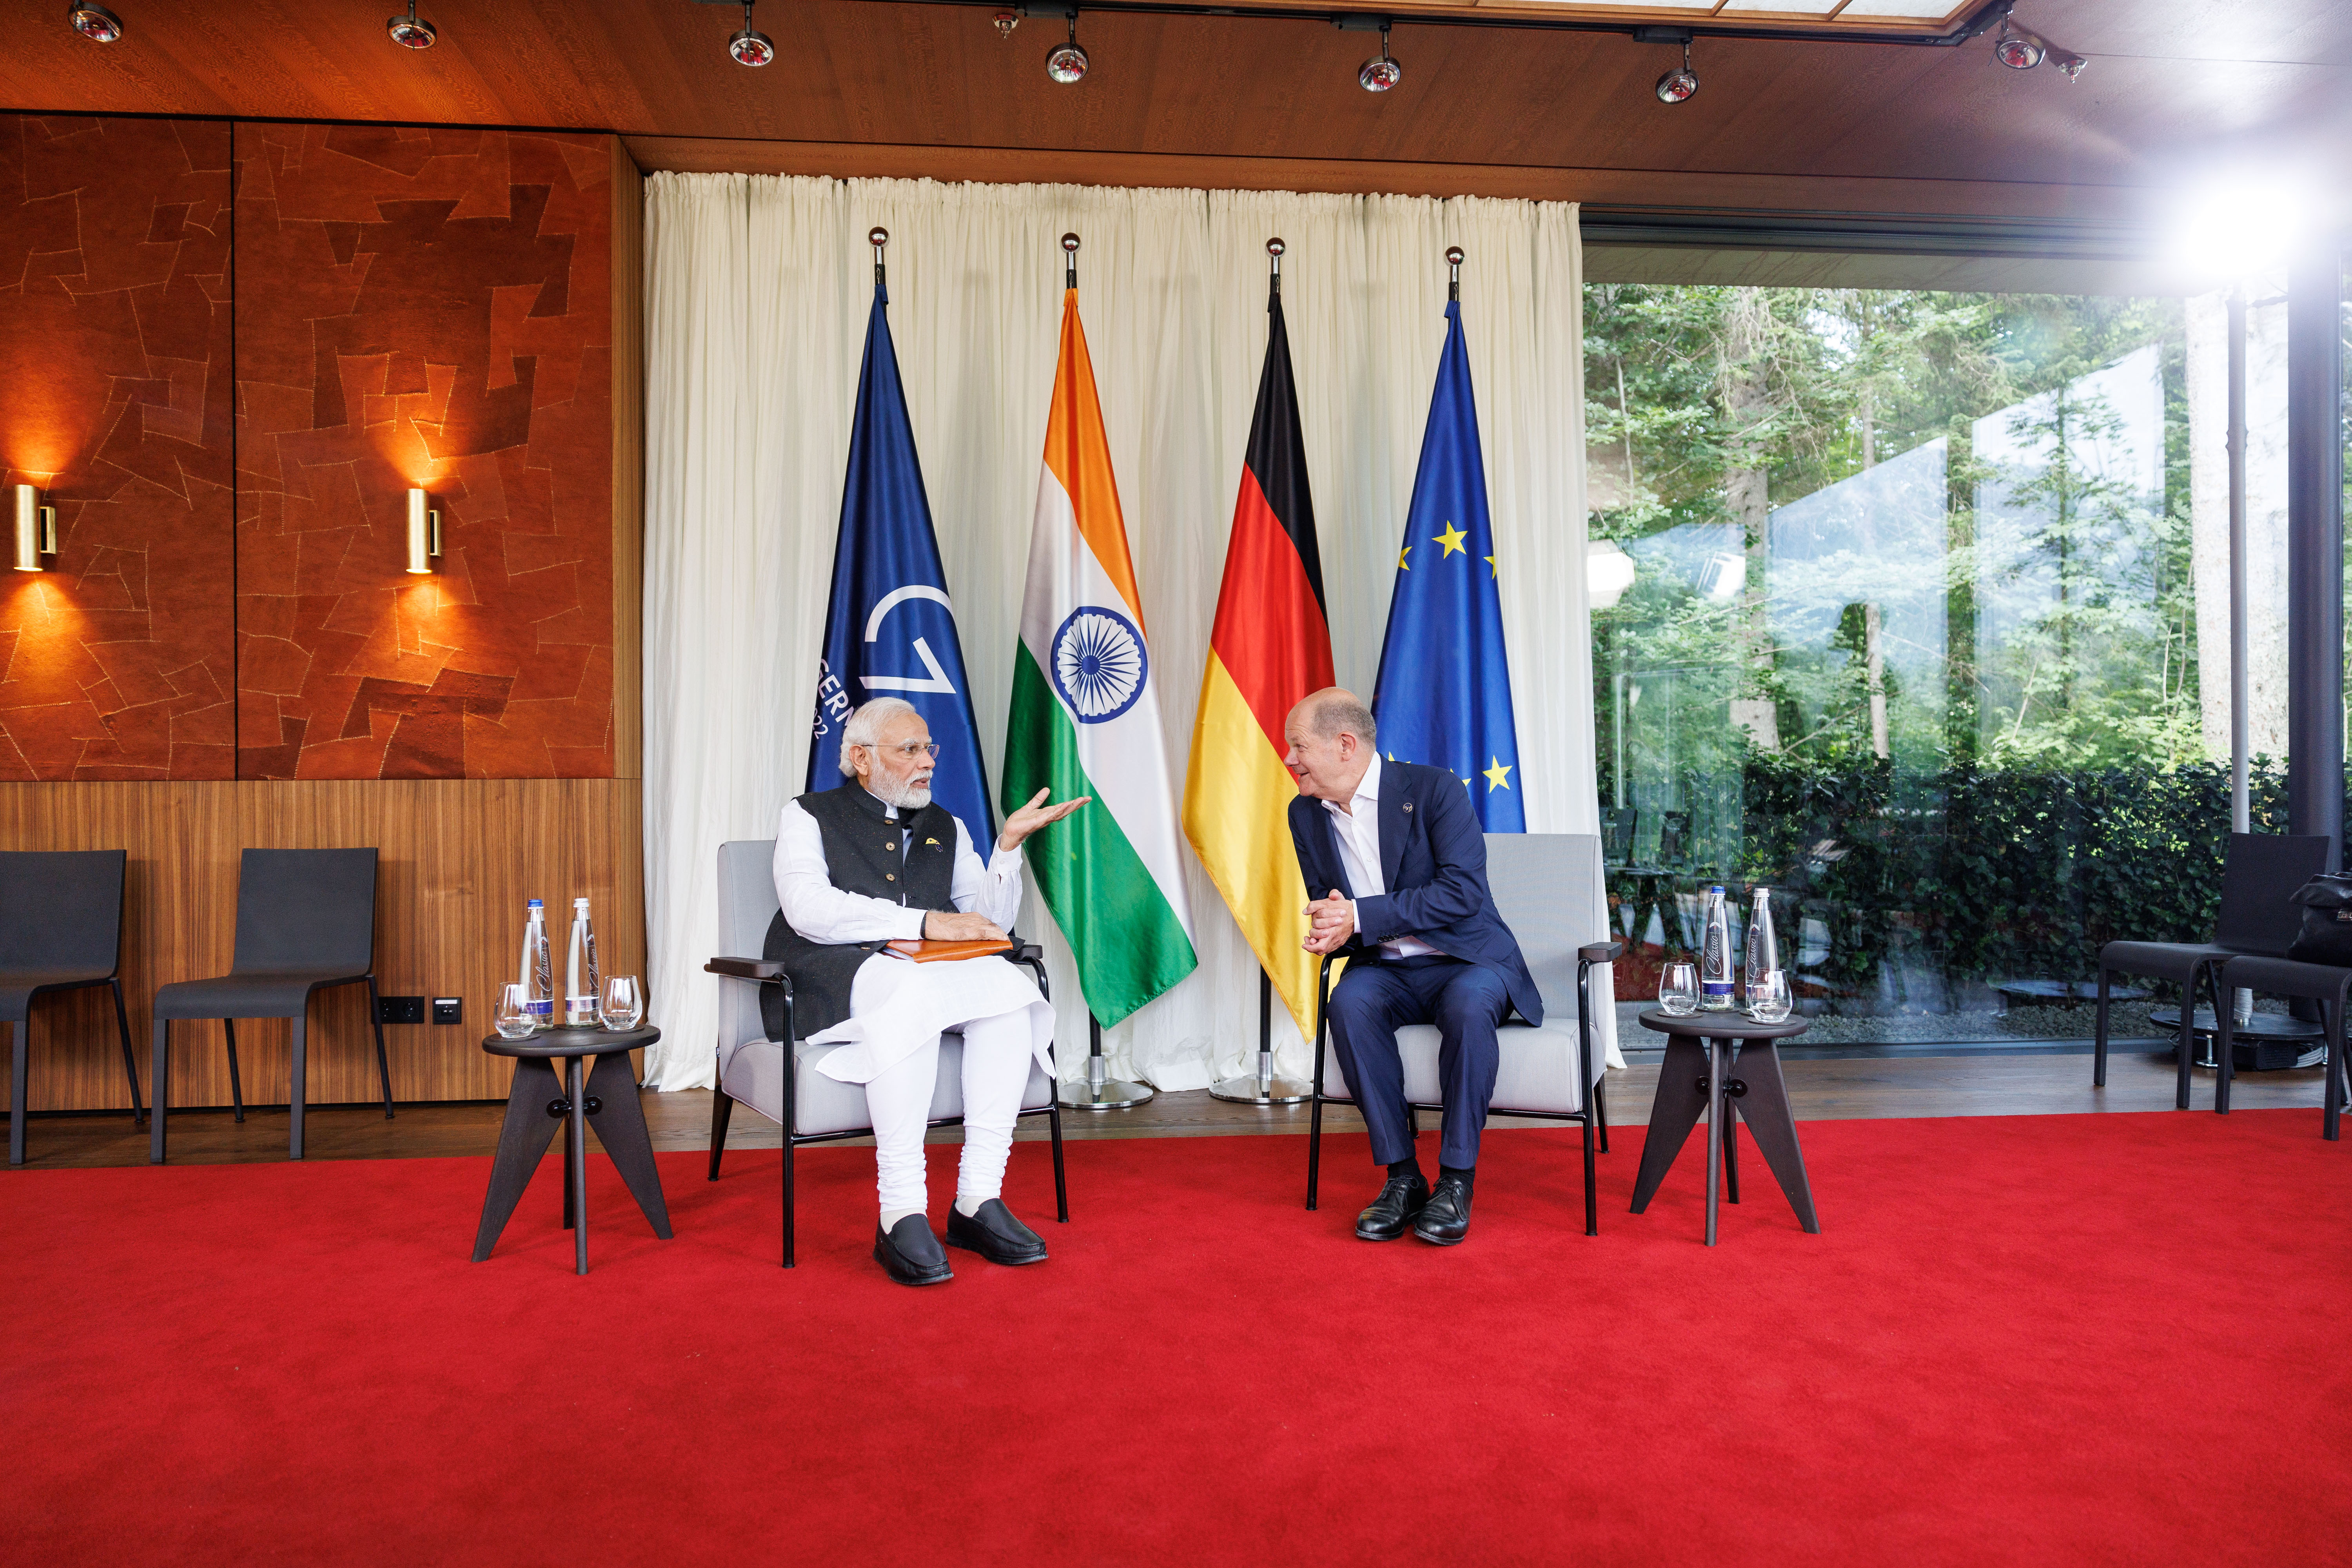 Bilateral meeting between Federal Chancellor Olaf Scholz and Indian Prime Minister Narendra Modi at Schloss Elmau.